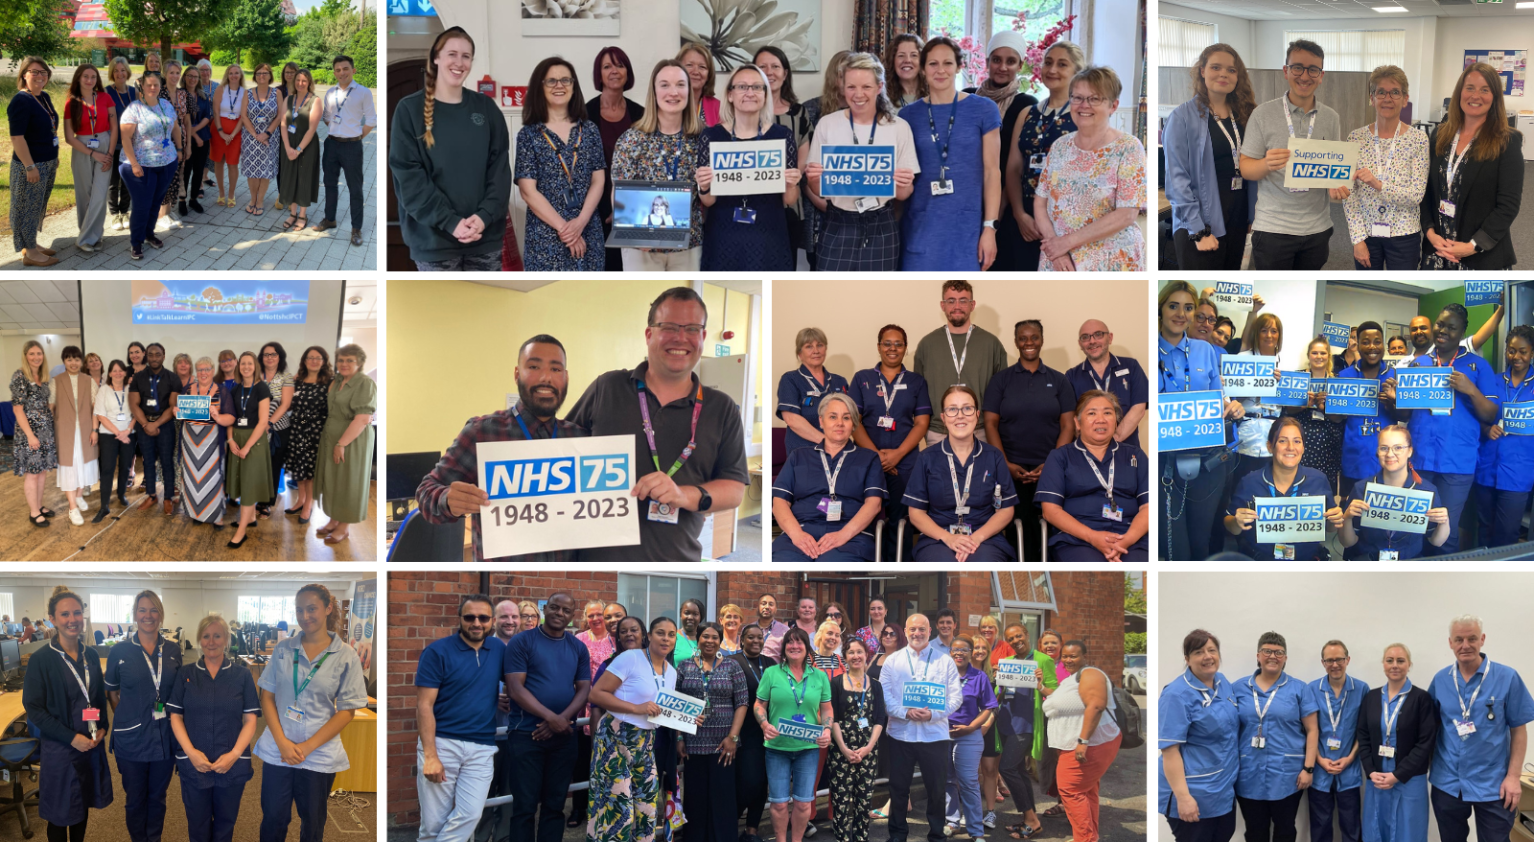 A photo montage of NHS staff working in different places. There are 10 photos which each show a group of healthcare staff.